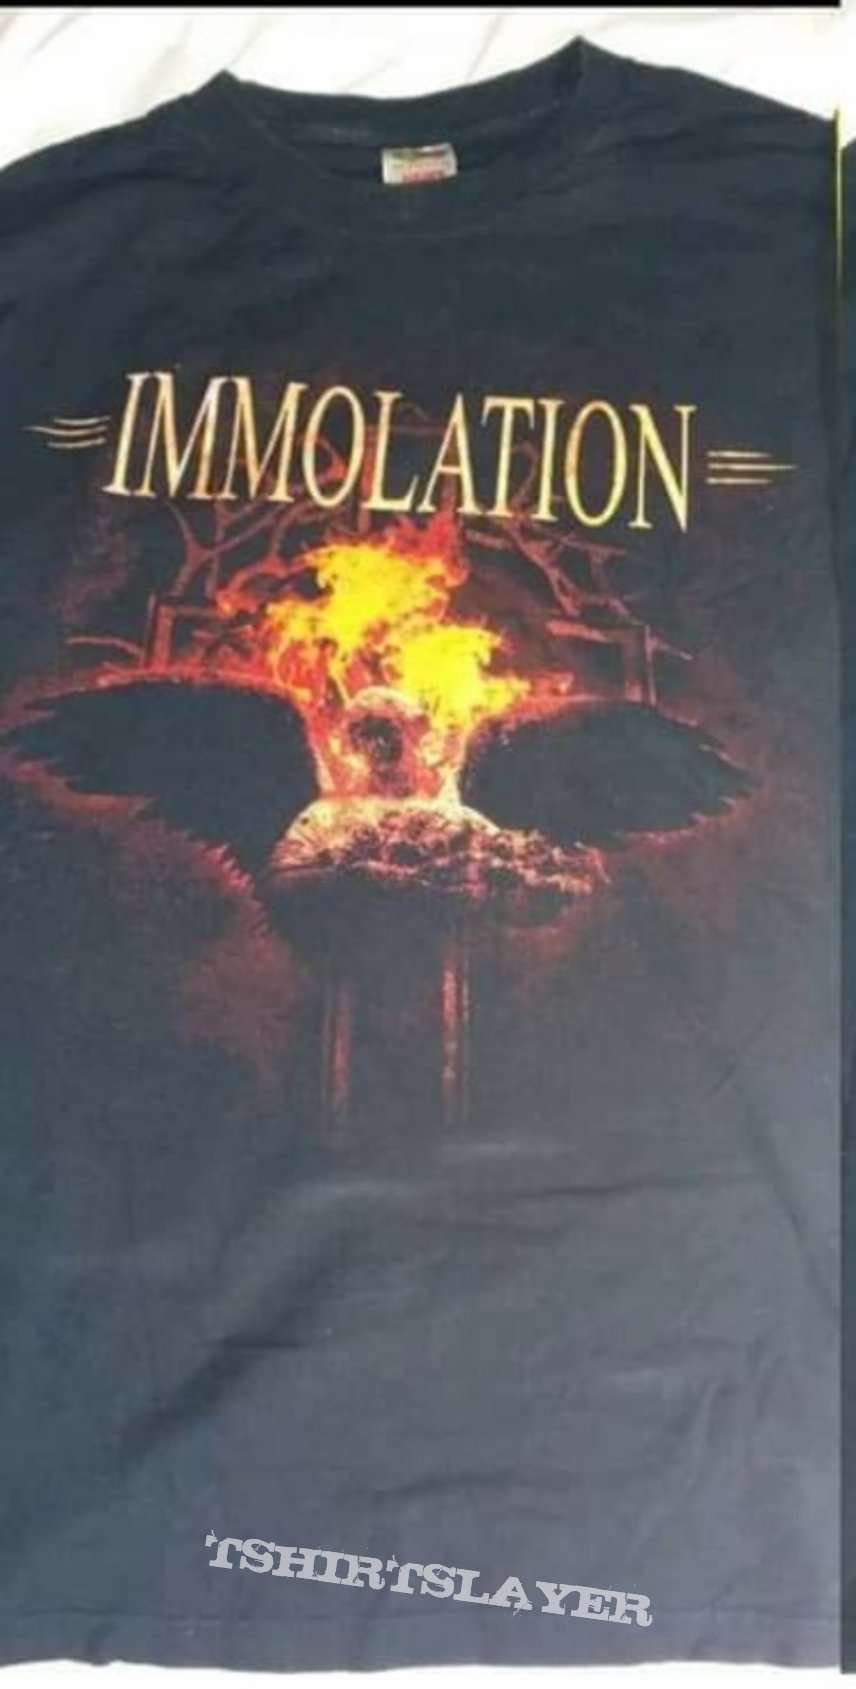 Immolation Burning Chaos on the Promised Land